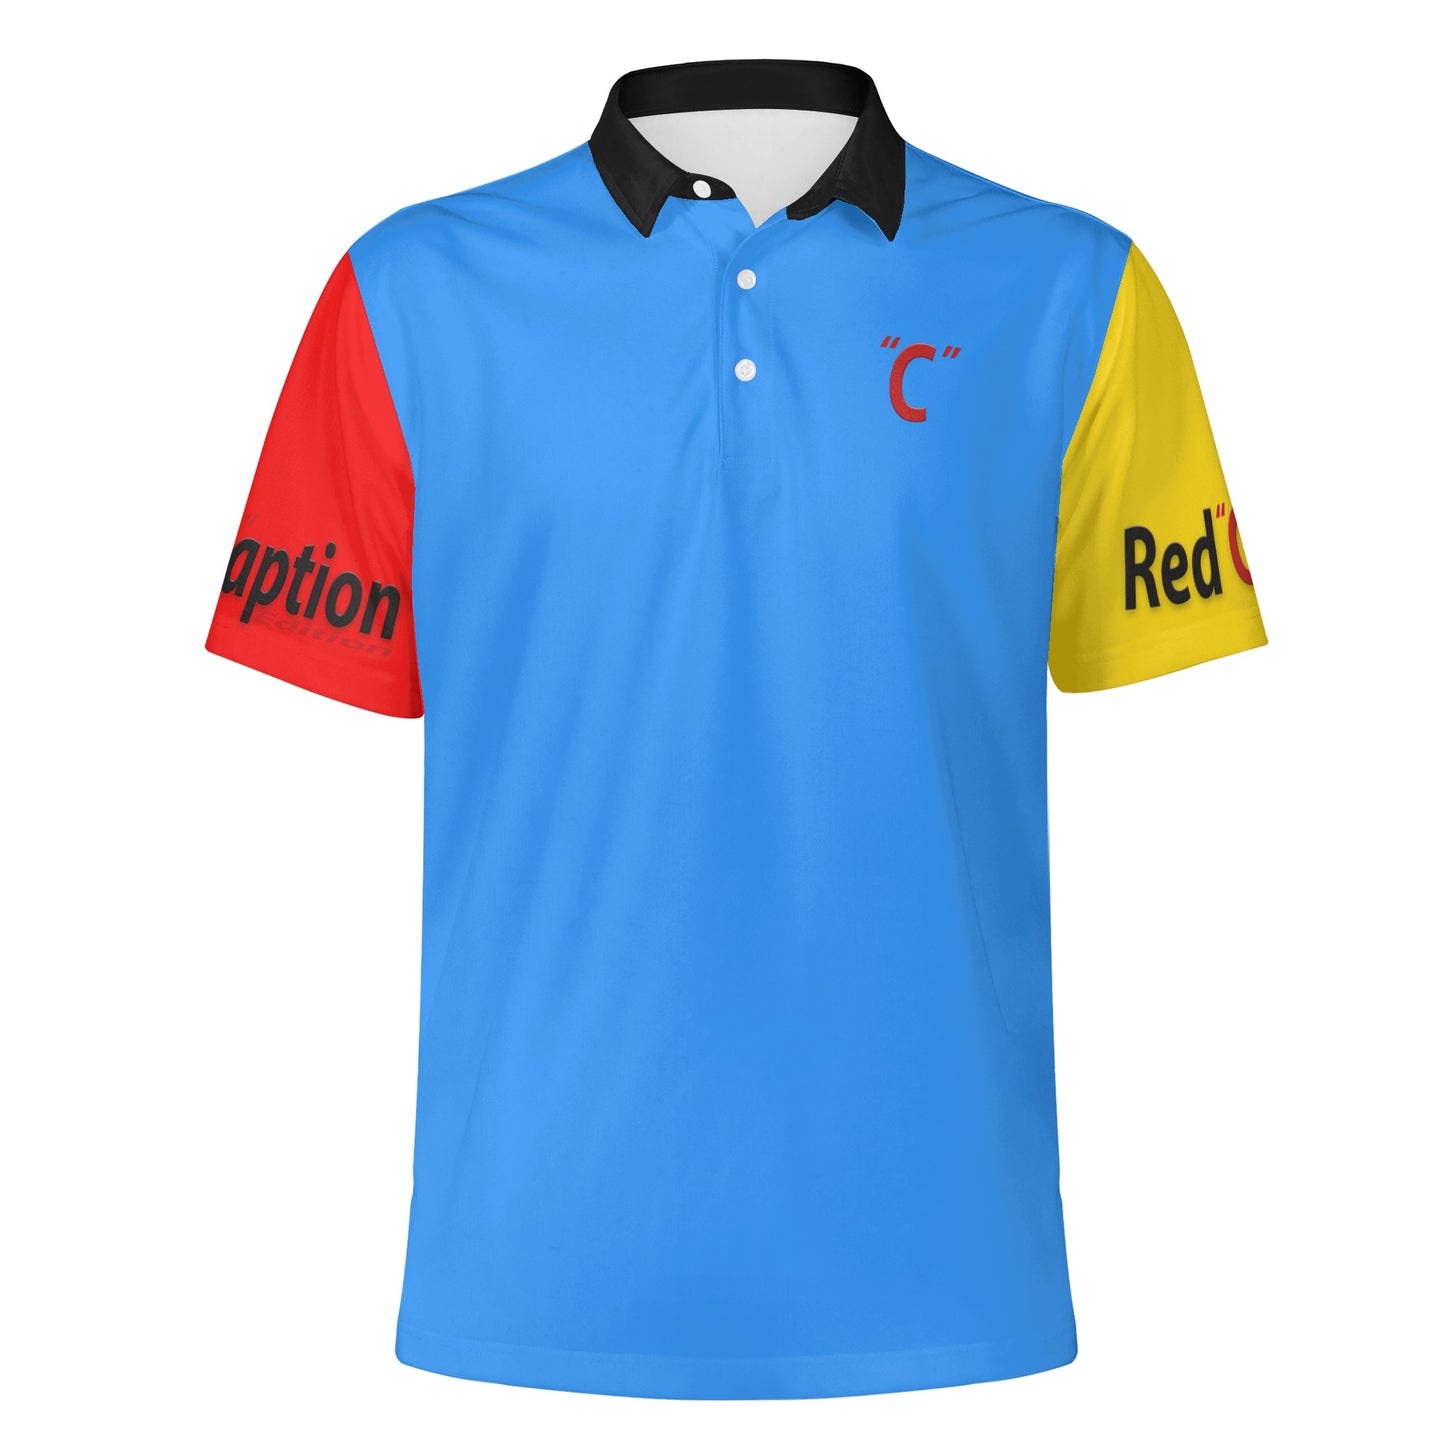 Red Caption Polo 1